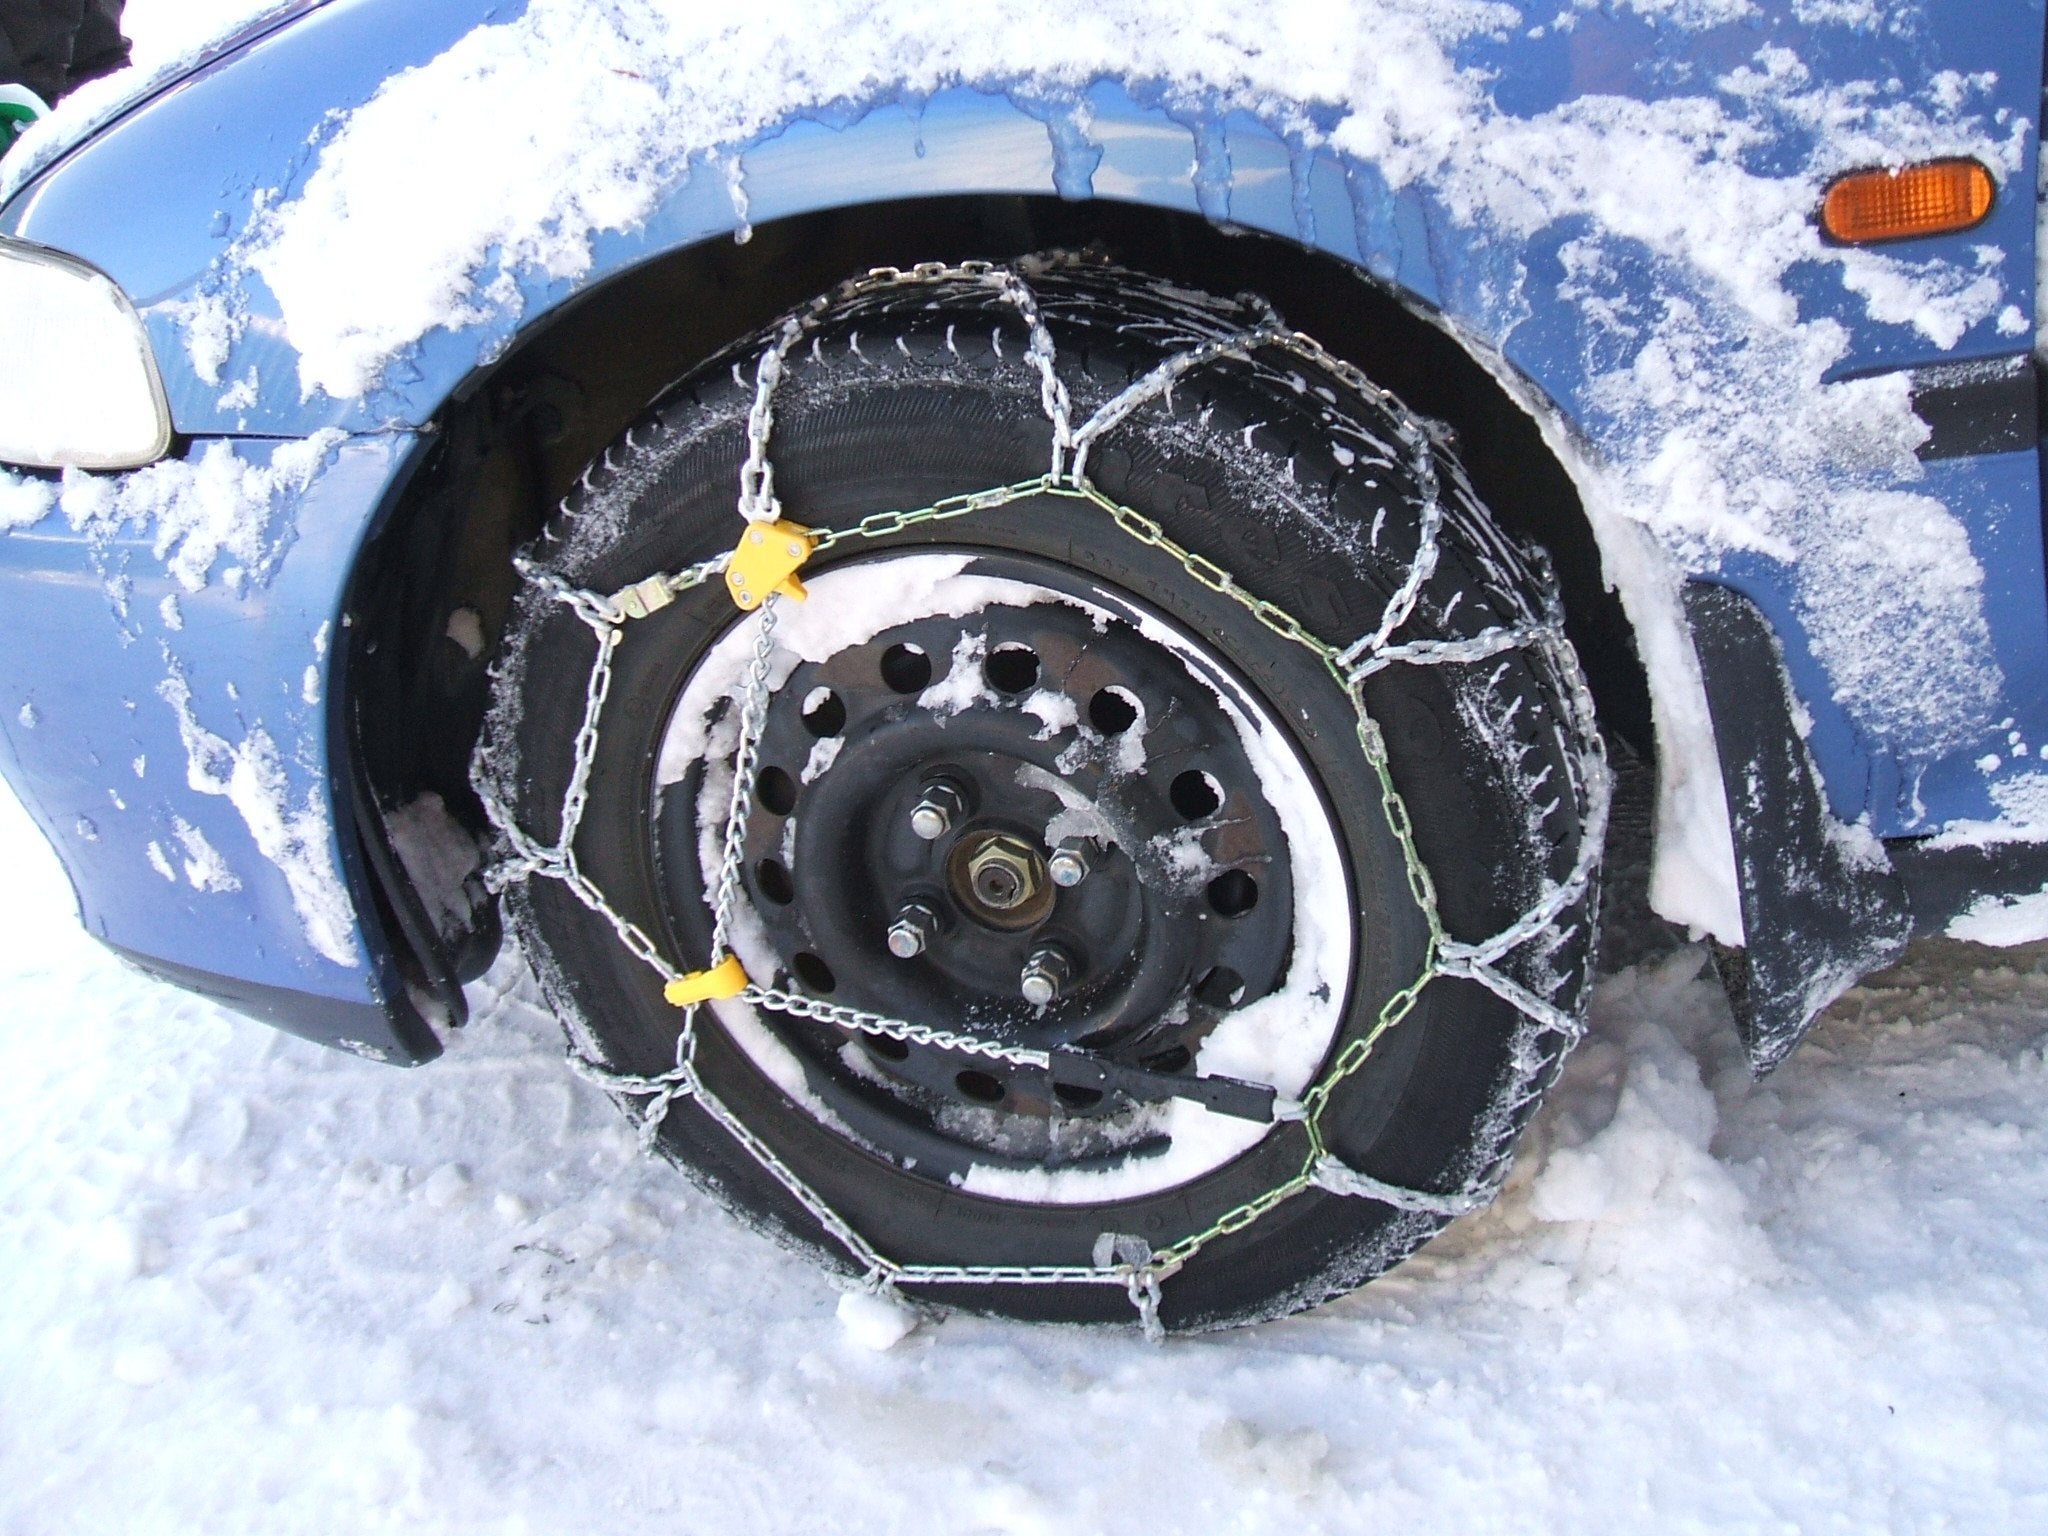 Tire chains: You probably shouldn't use them